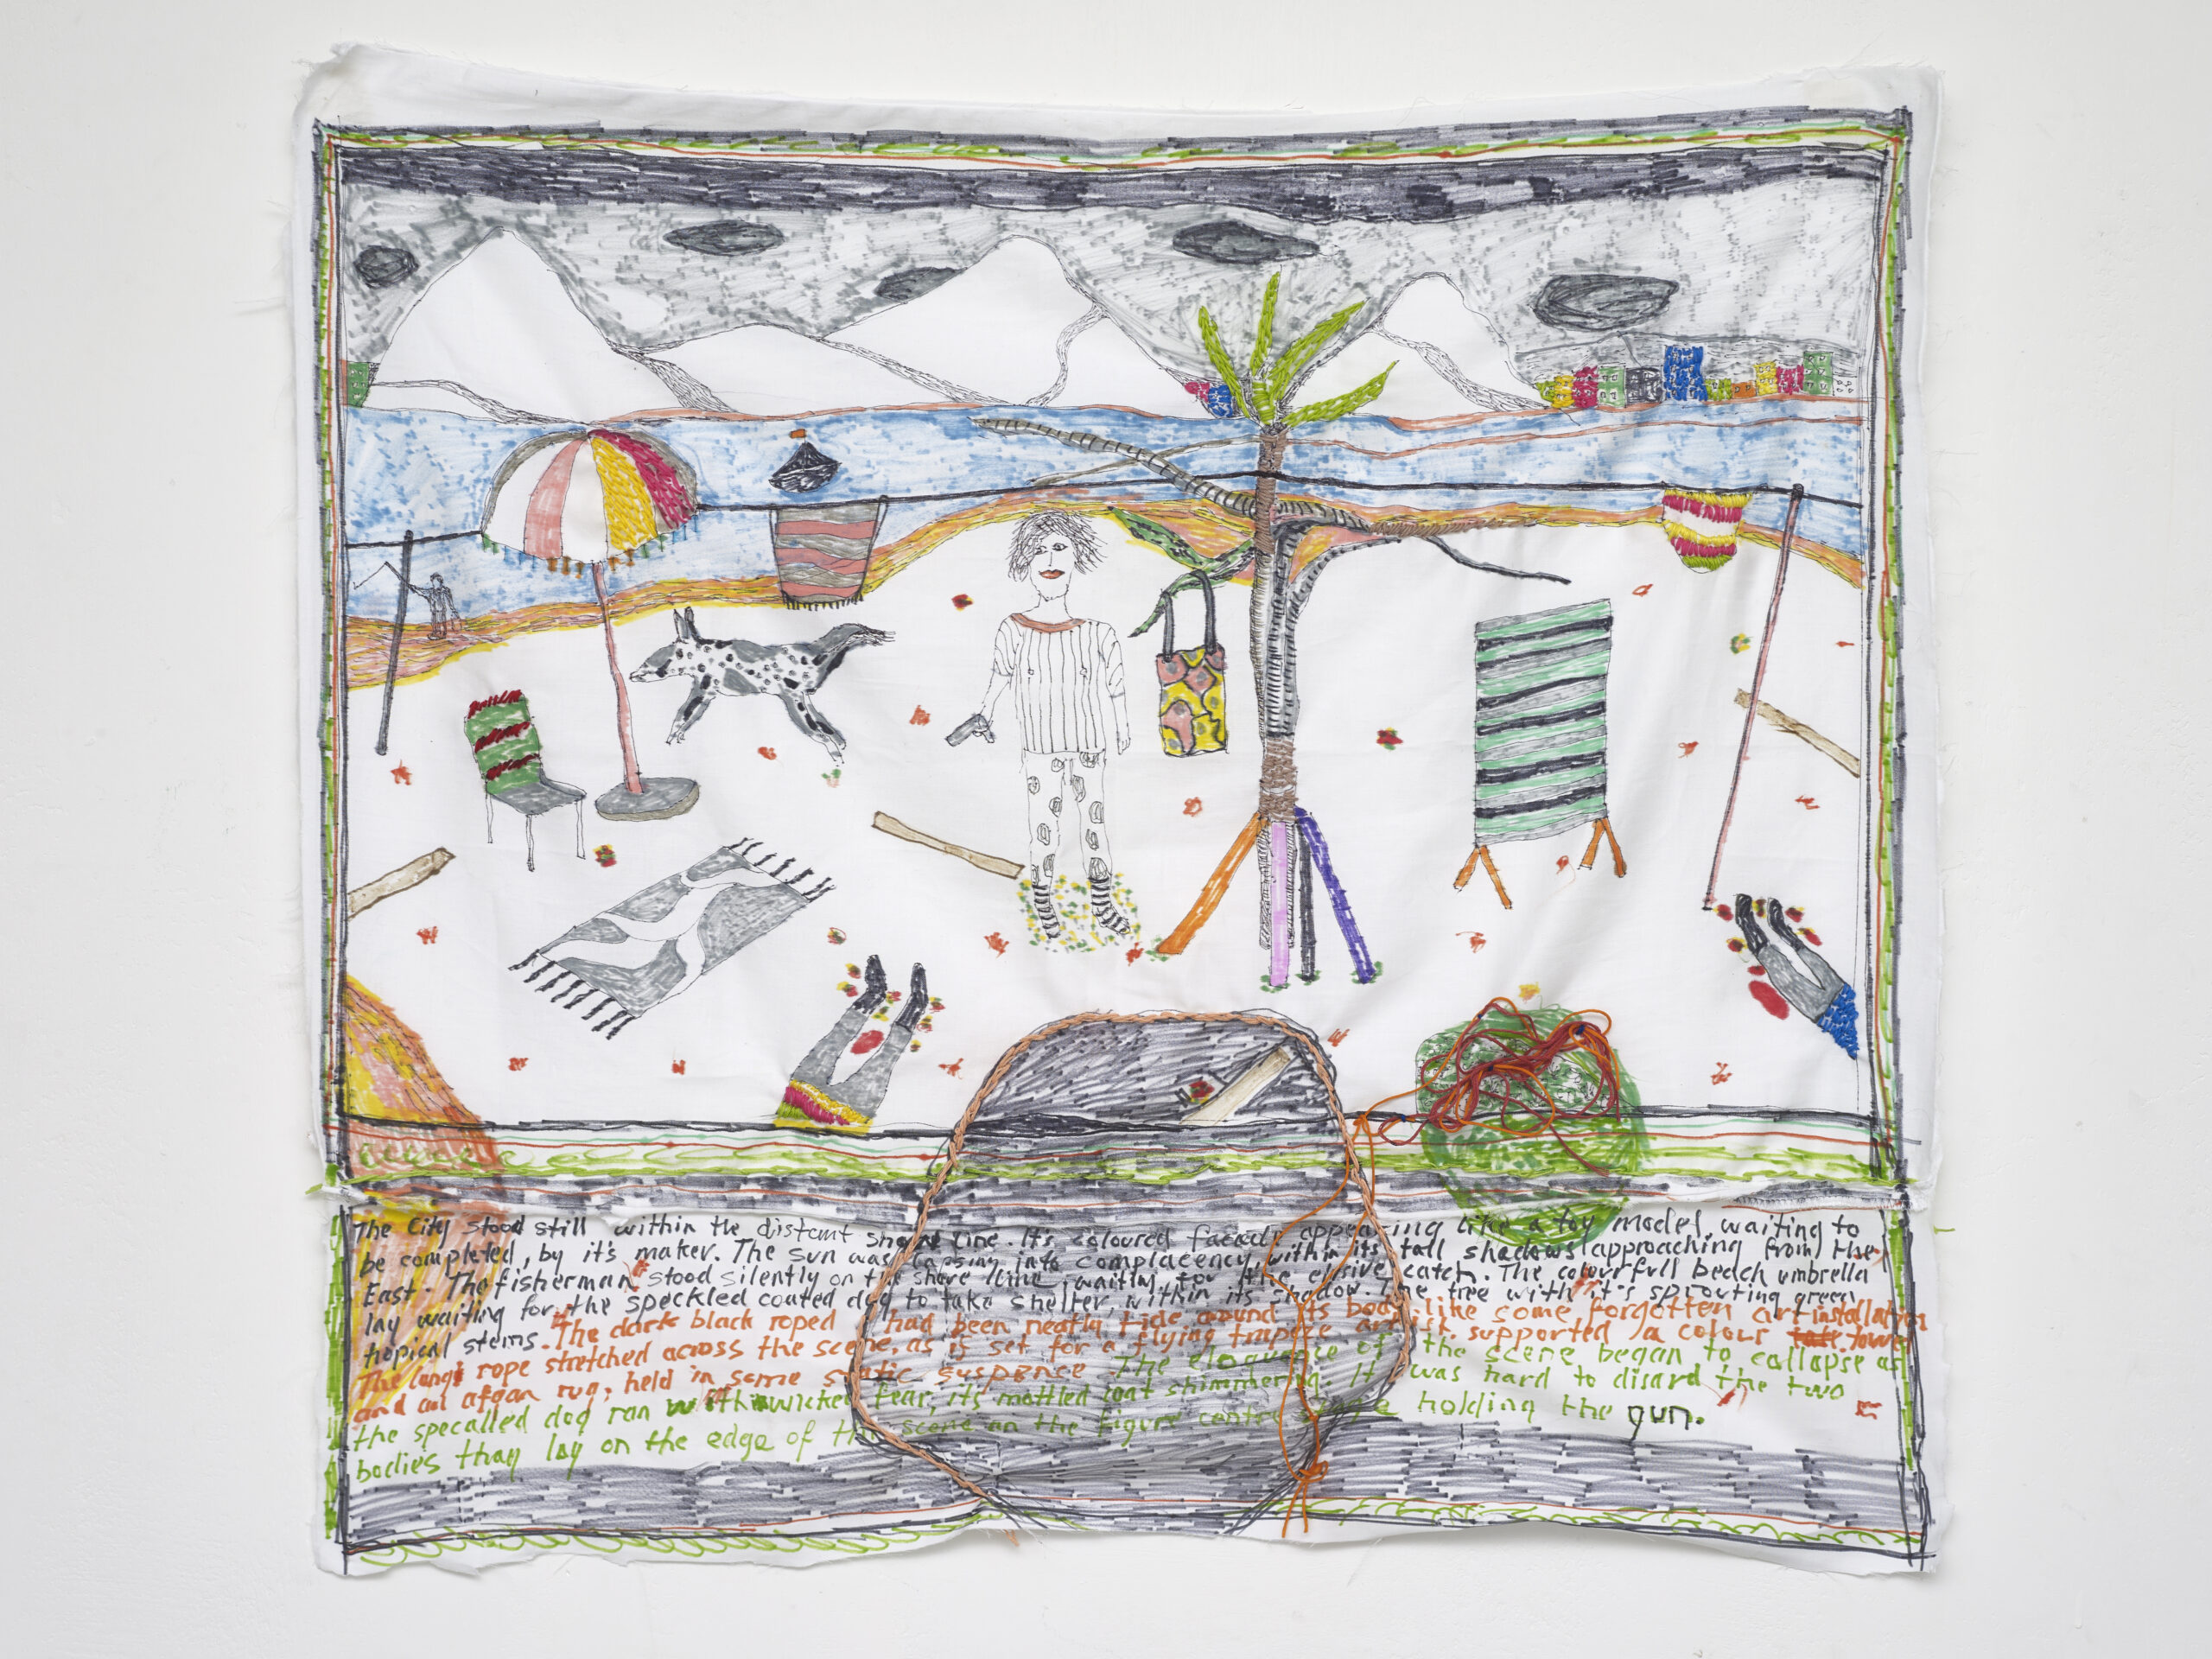 Brian Dawn Chalkley: Waiting for the elusive catch (2020) Pencil, felt tip and thread on cotton pillow case, 75 cm x 65 cm.